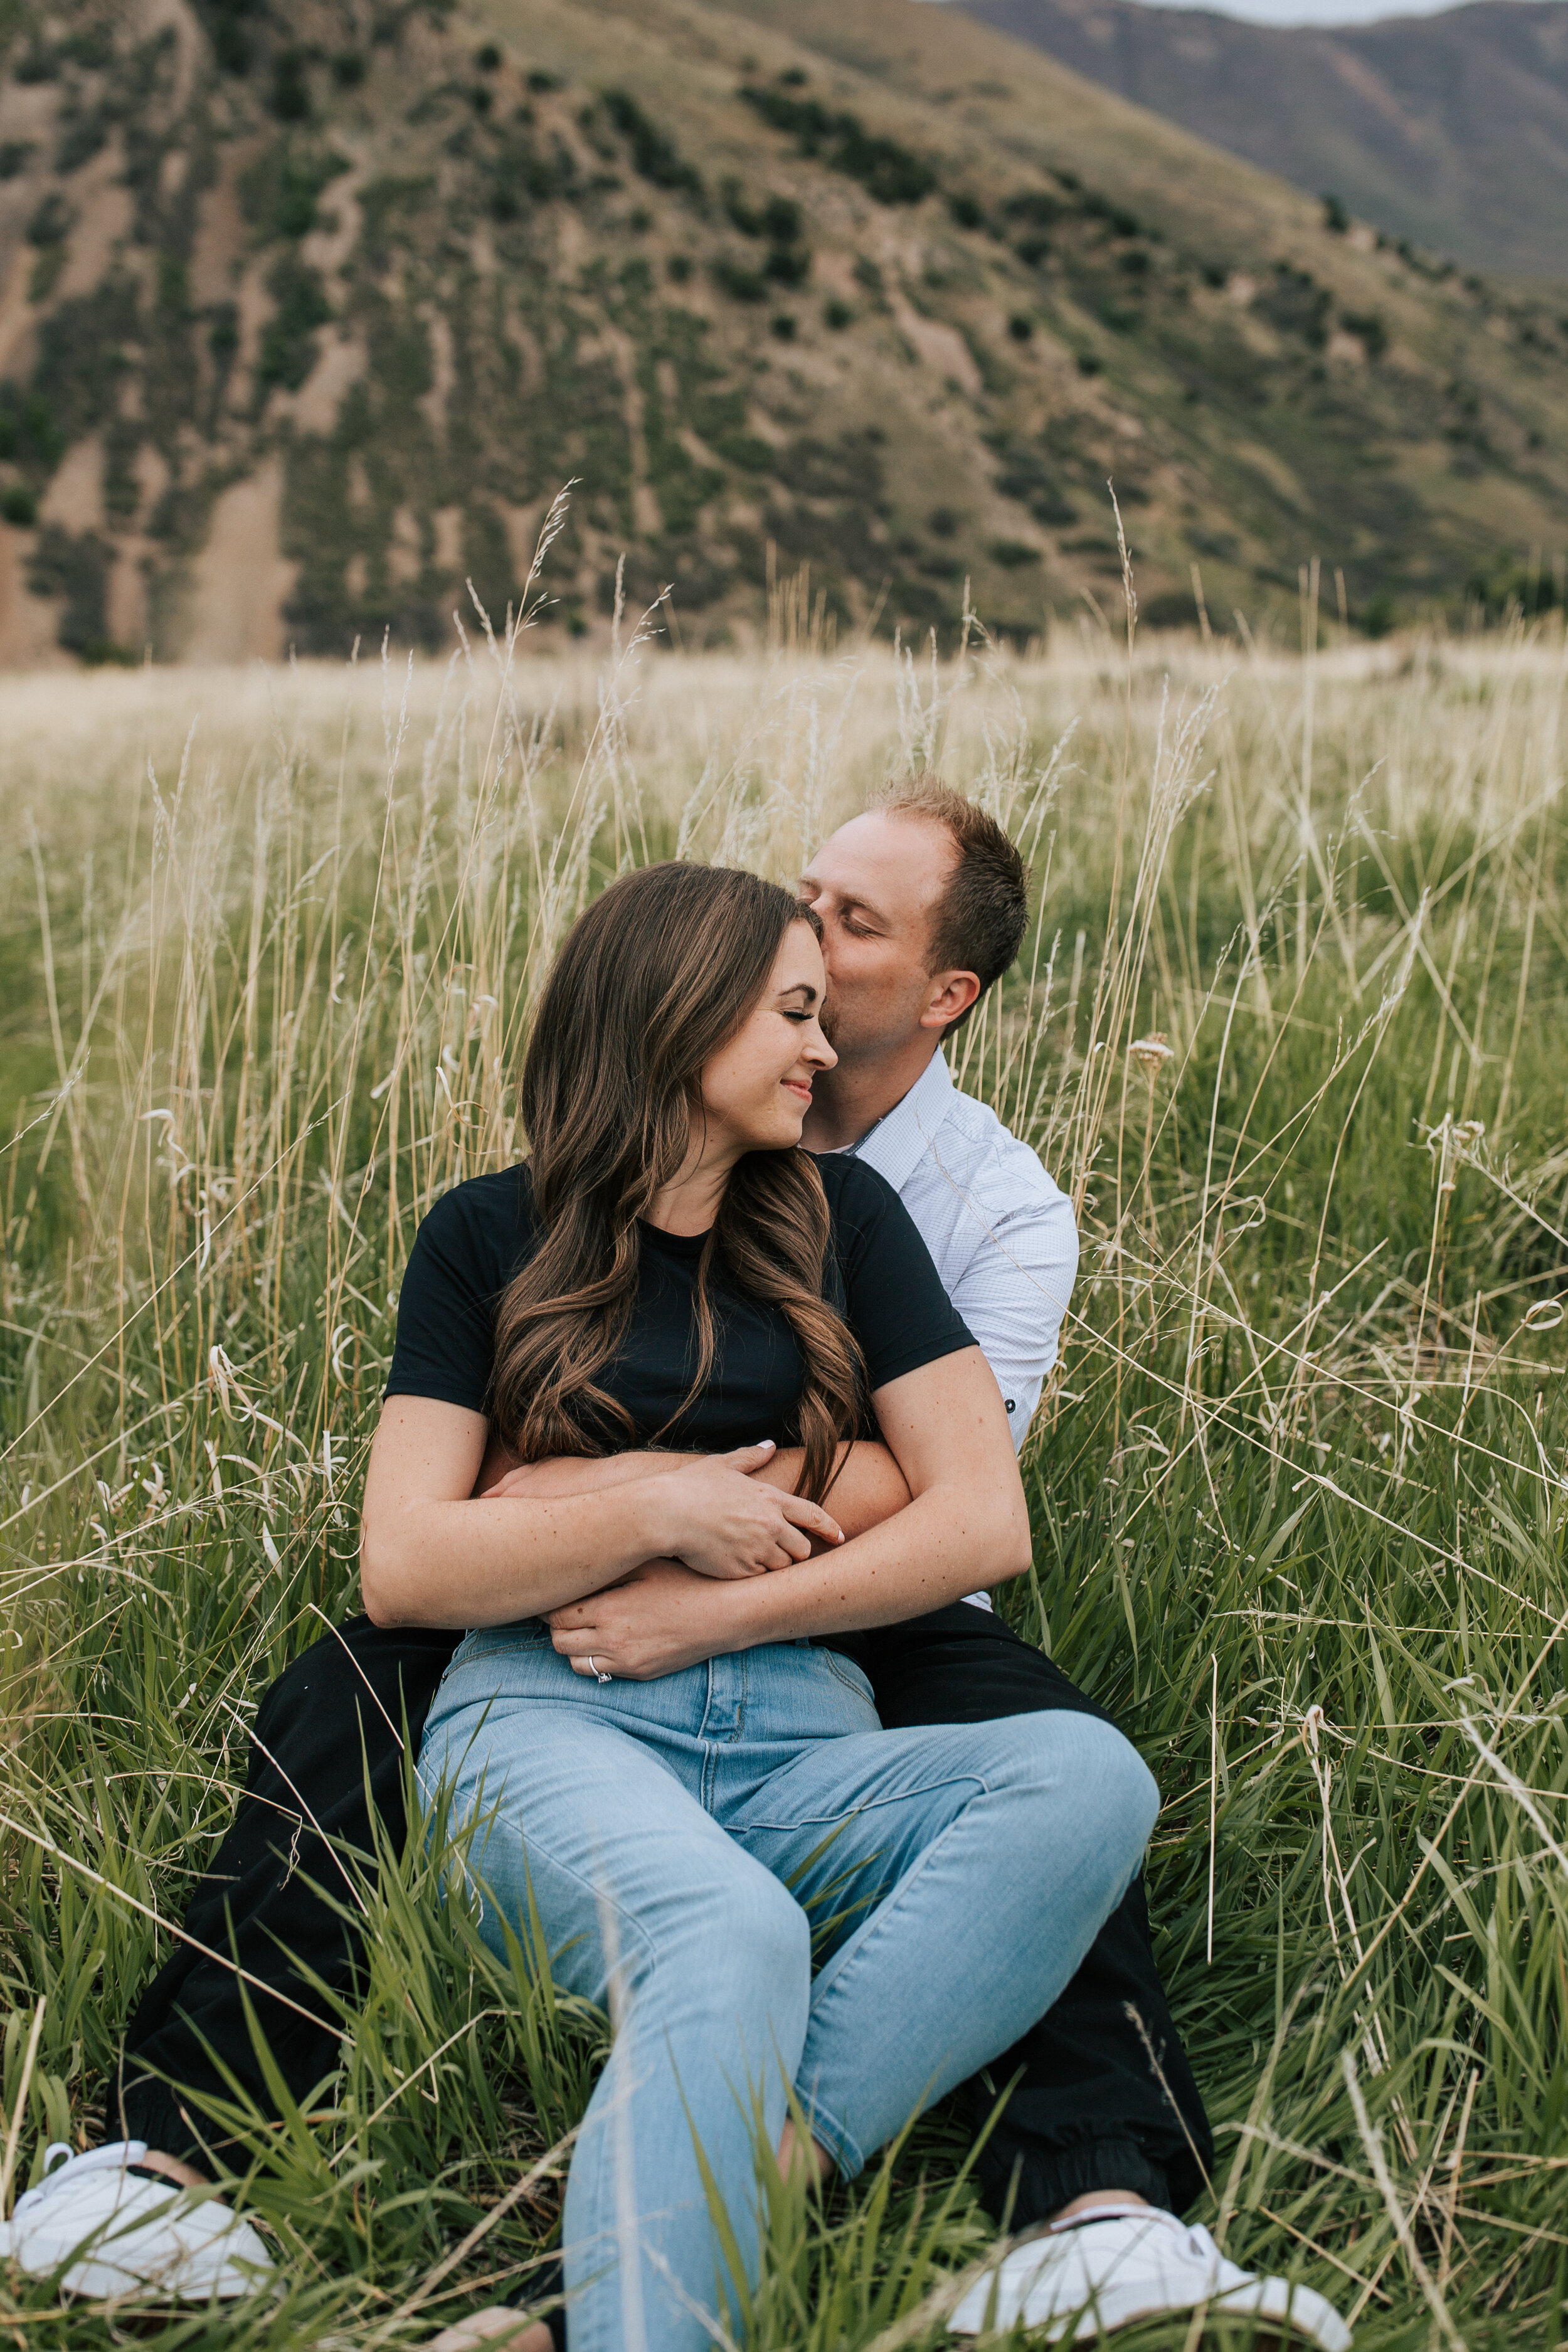  Couples session in the Utah mountains. Park City couples shoot. Summer couples shoot. Casual couple outfit inspo.  #engagementsession #couplesession #coupleshoot #weddingphotography #elopement  